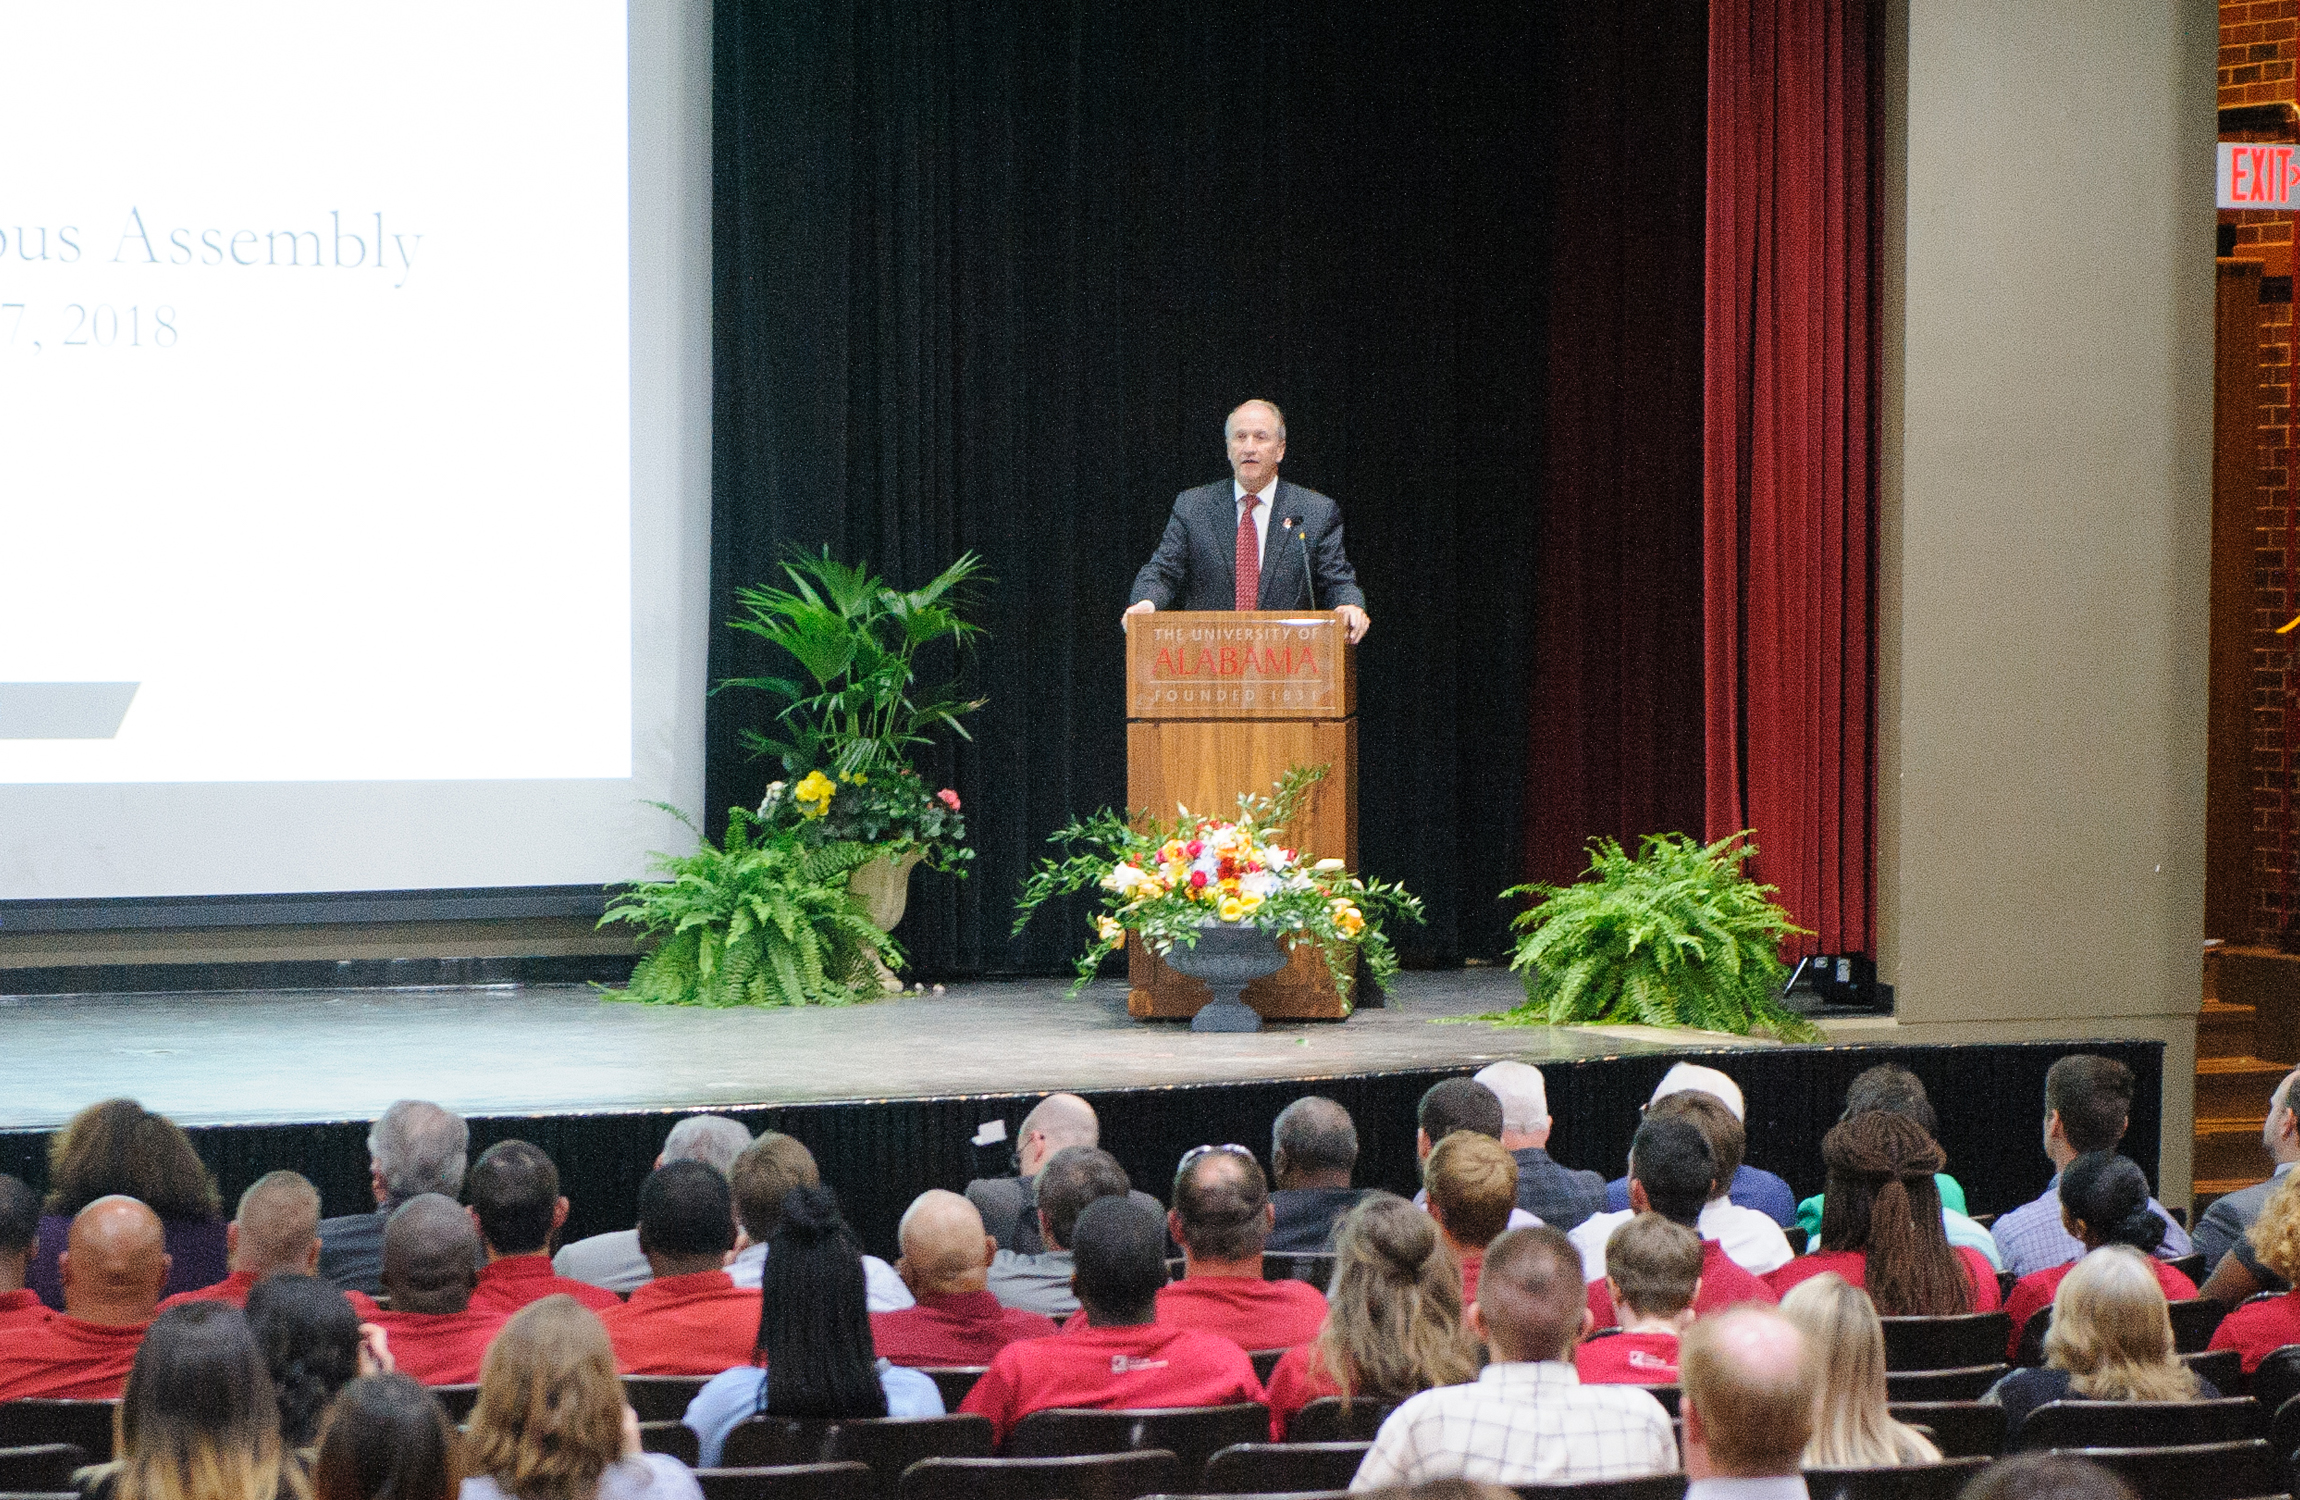 Bell Highlights Achievements, Growth at Spring Campus Assembly